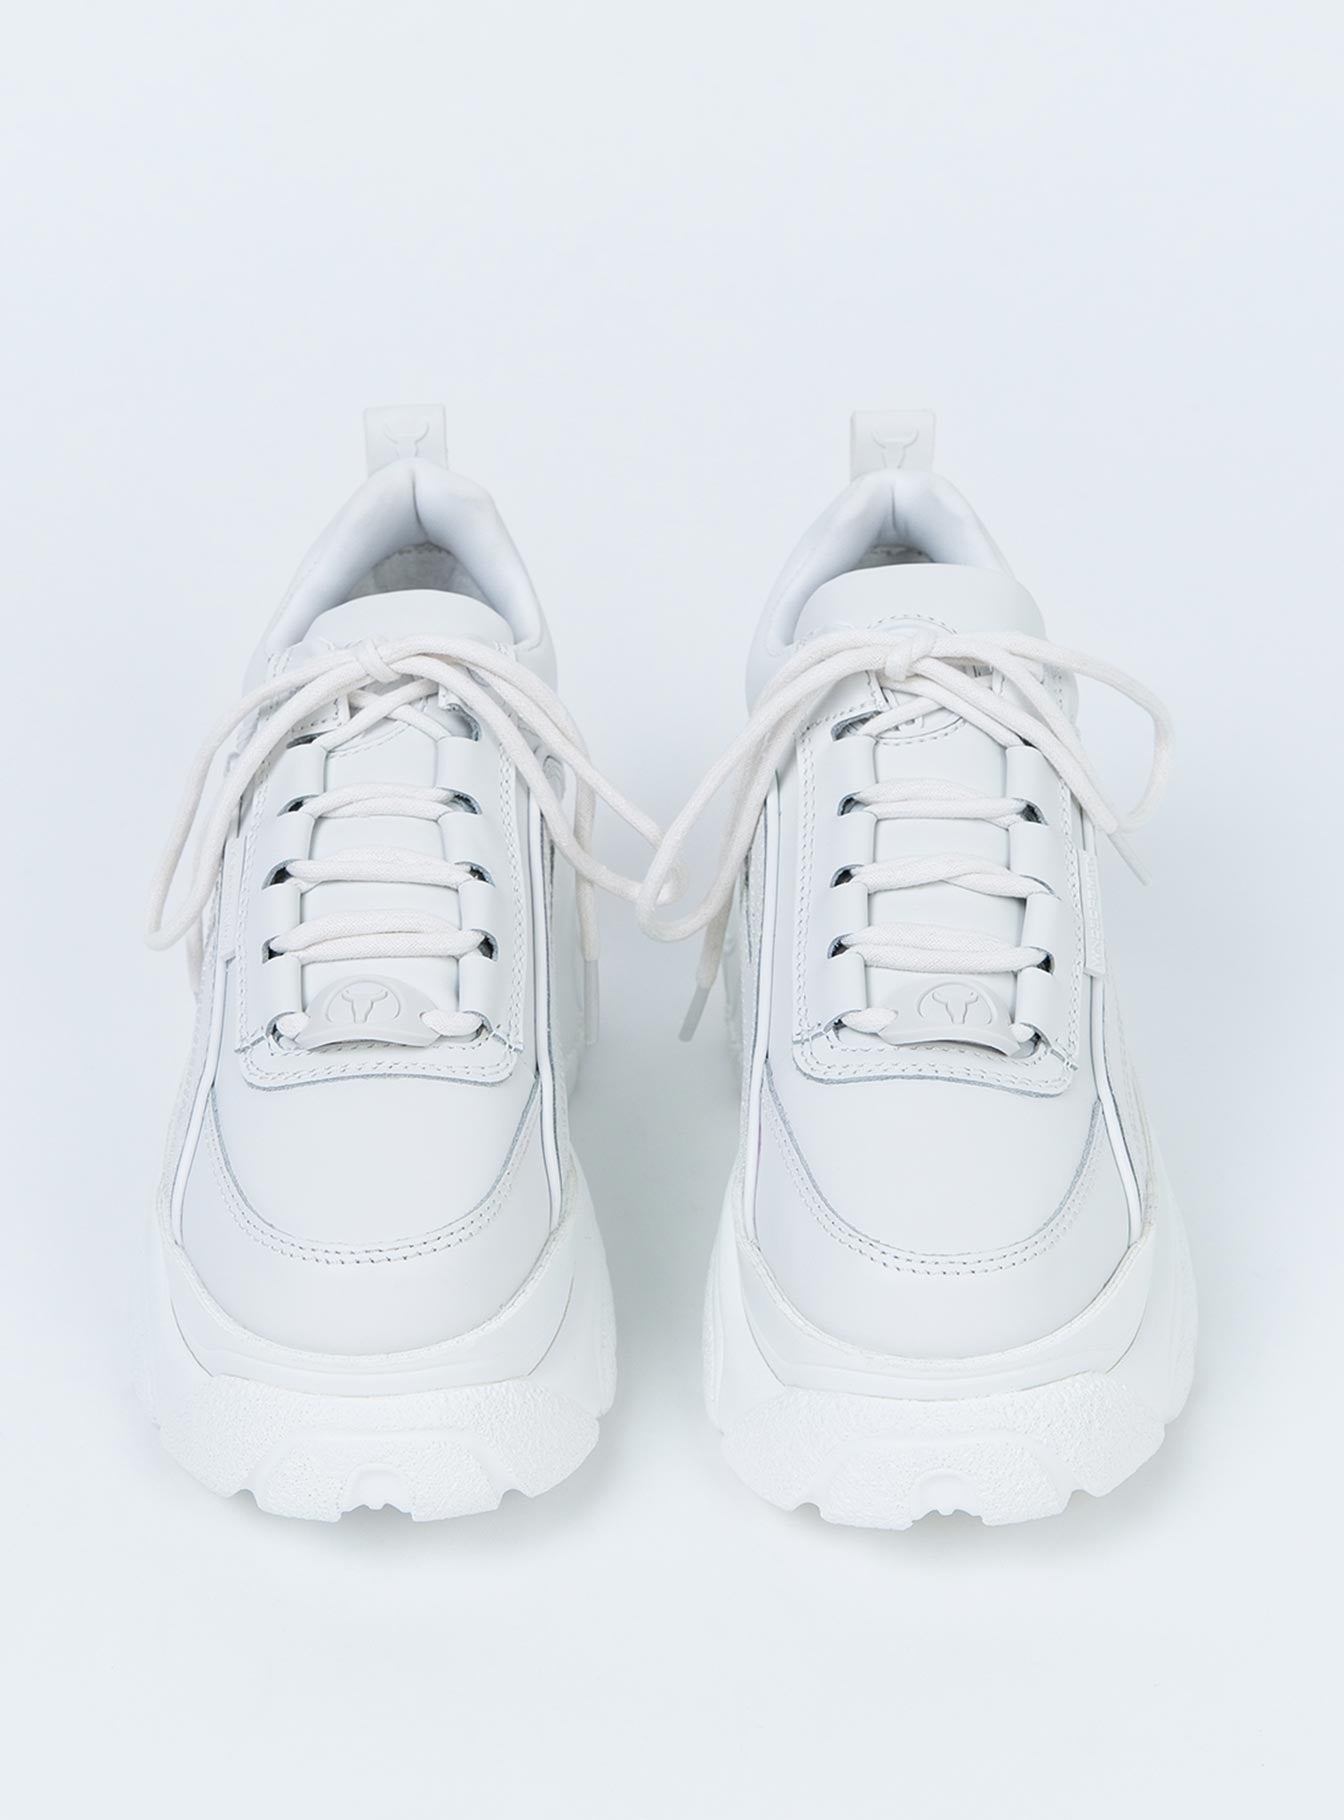 Windsor Smith Lupe Sneaker White